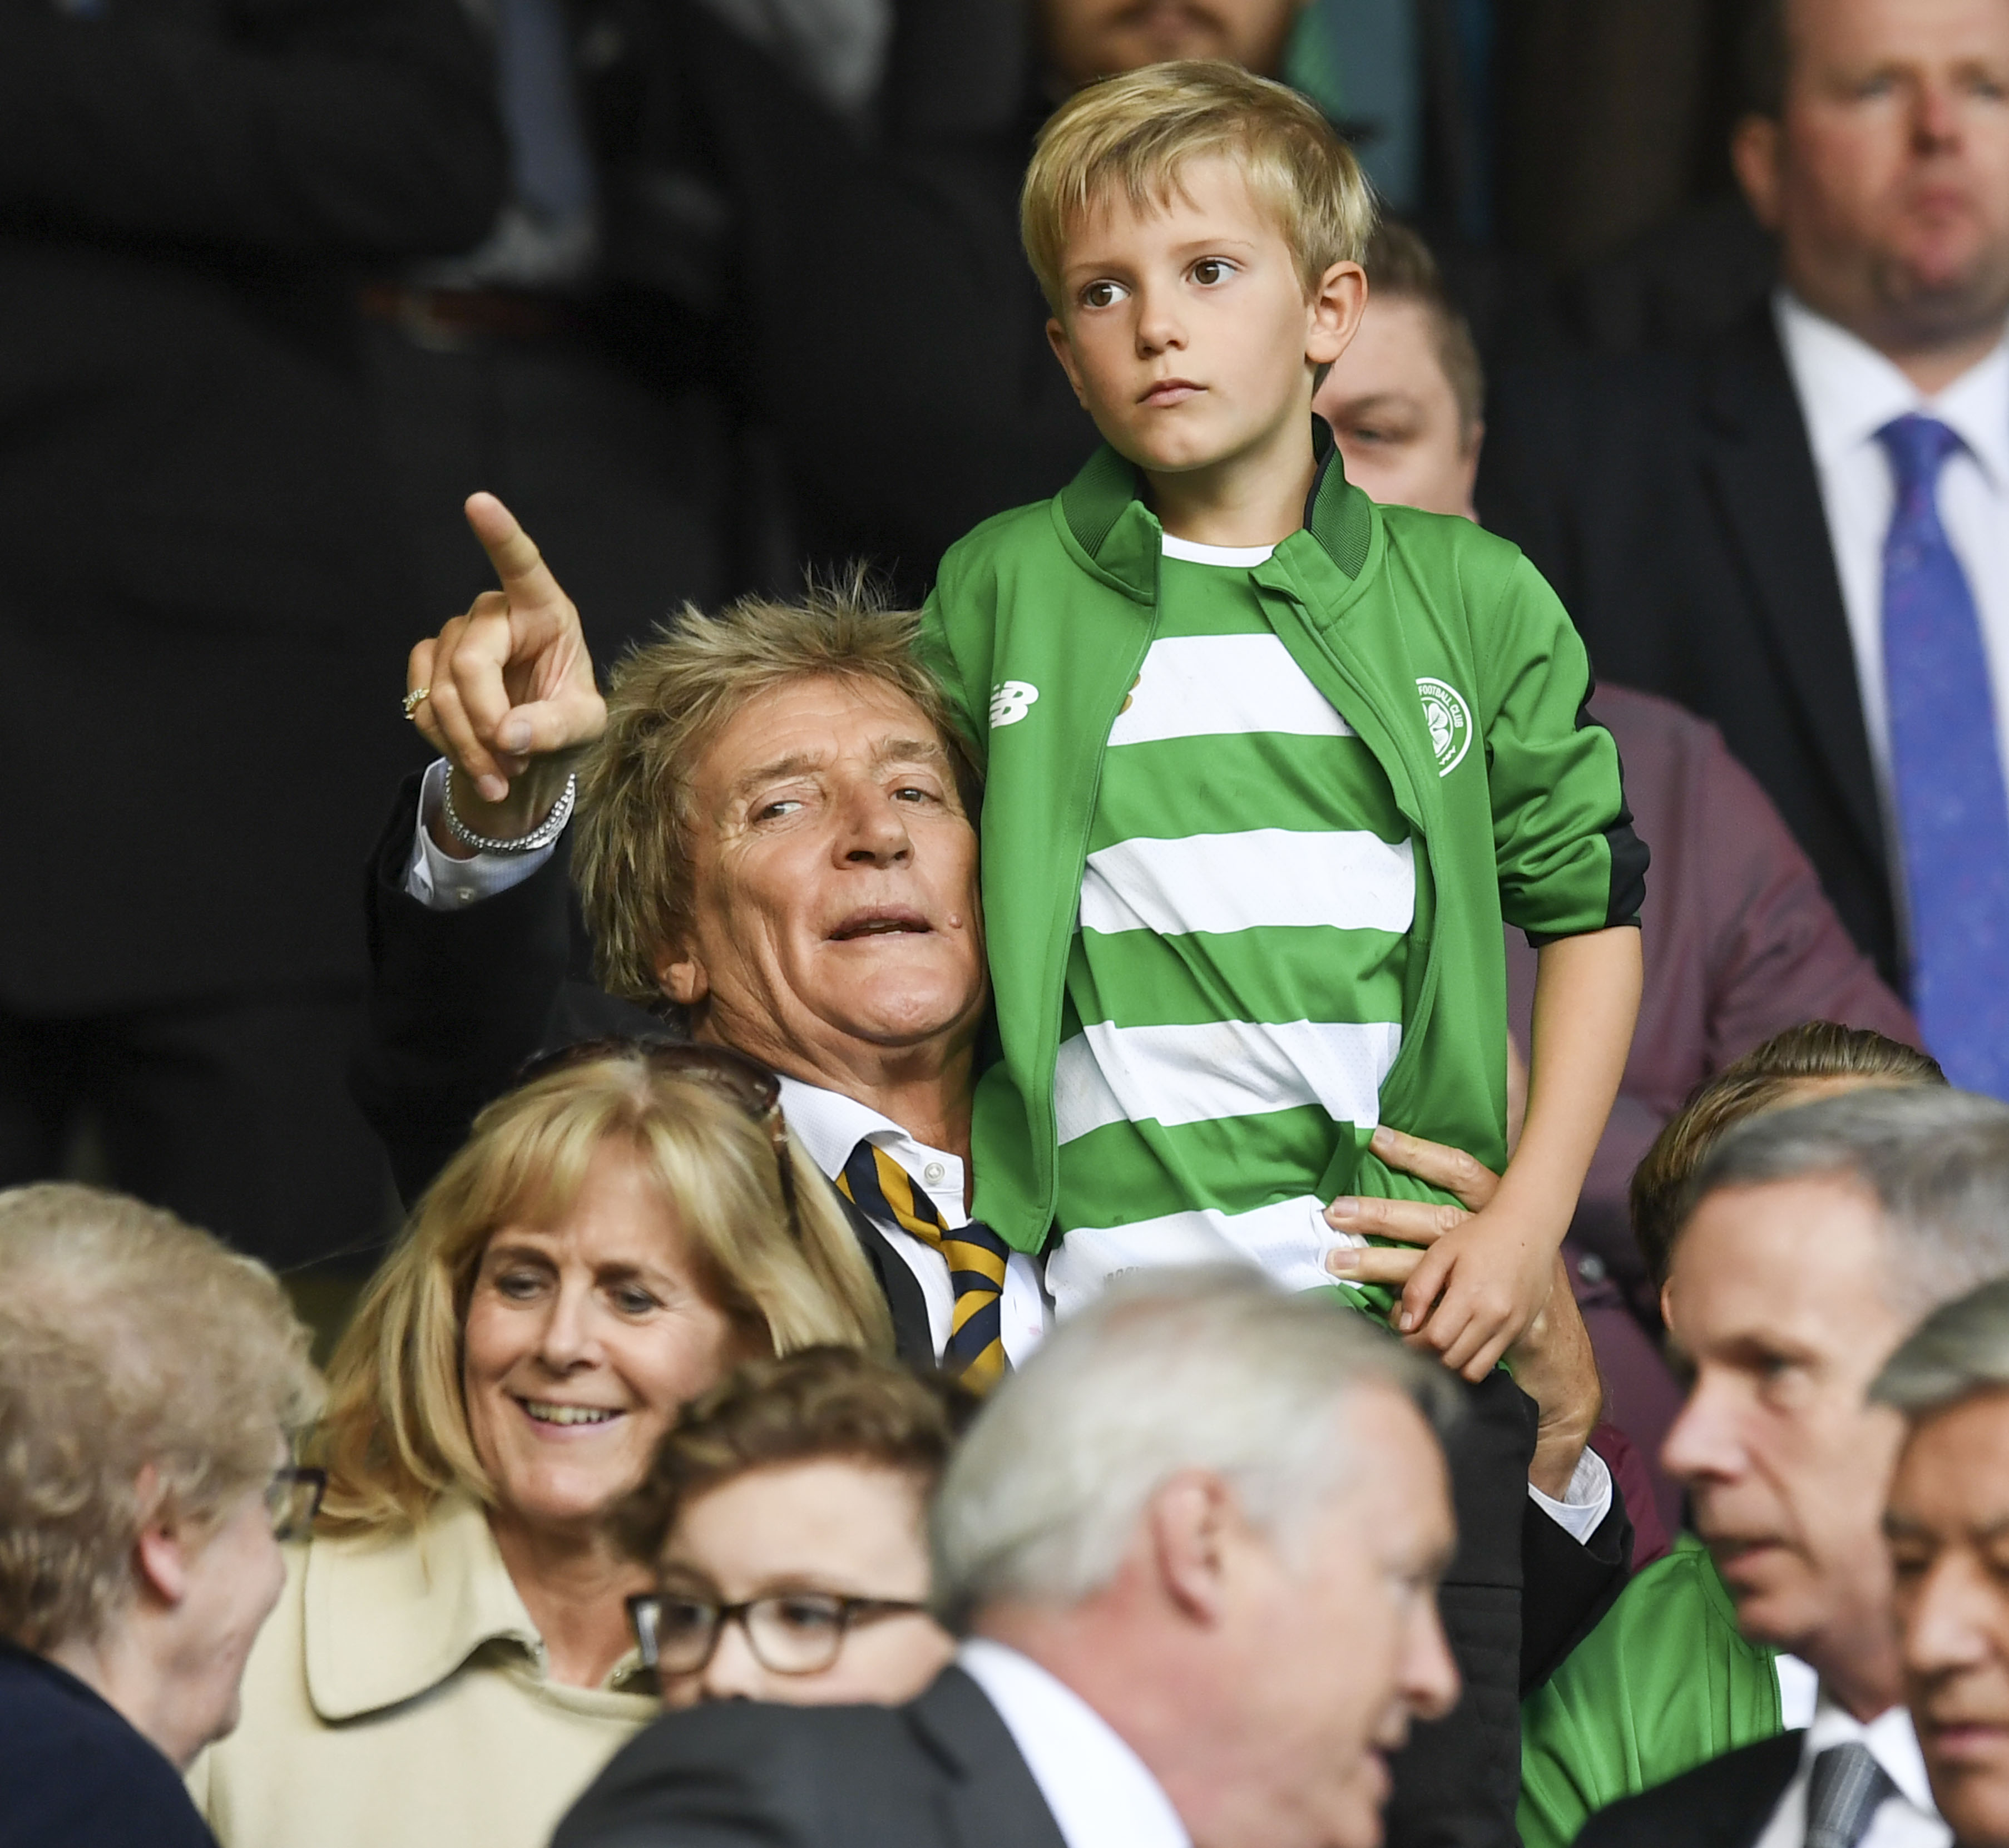 Rod and Aiden Stewart during the Ladbrokes Premiership match between Celtic and Hibernian in Glasgow, Scotland, on September 30, 2017. | Source: Getty Images